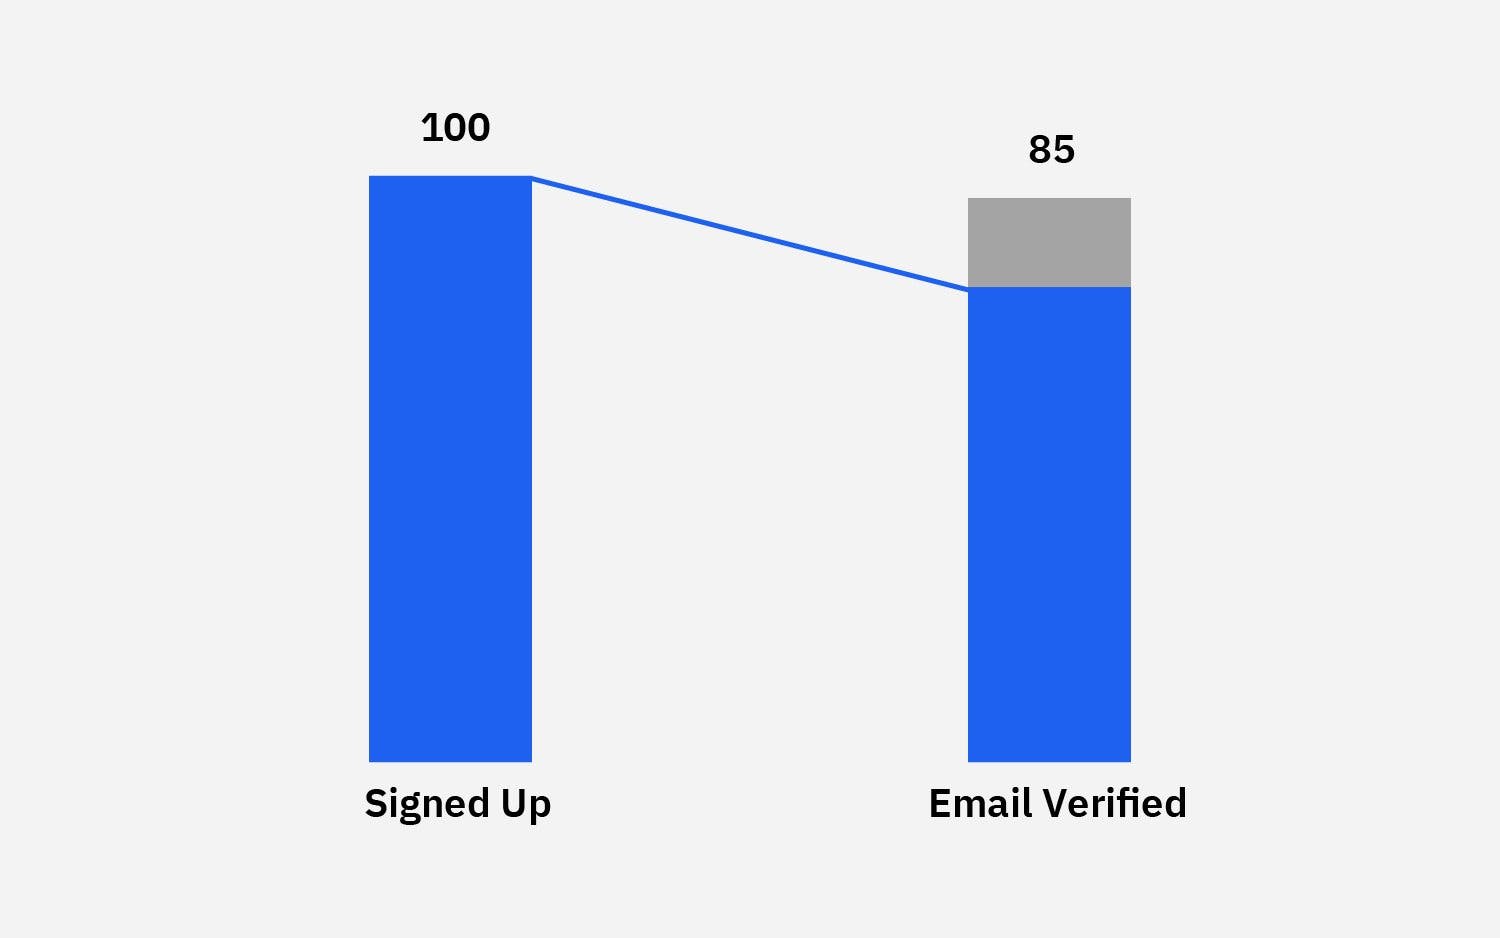 Email verified event